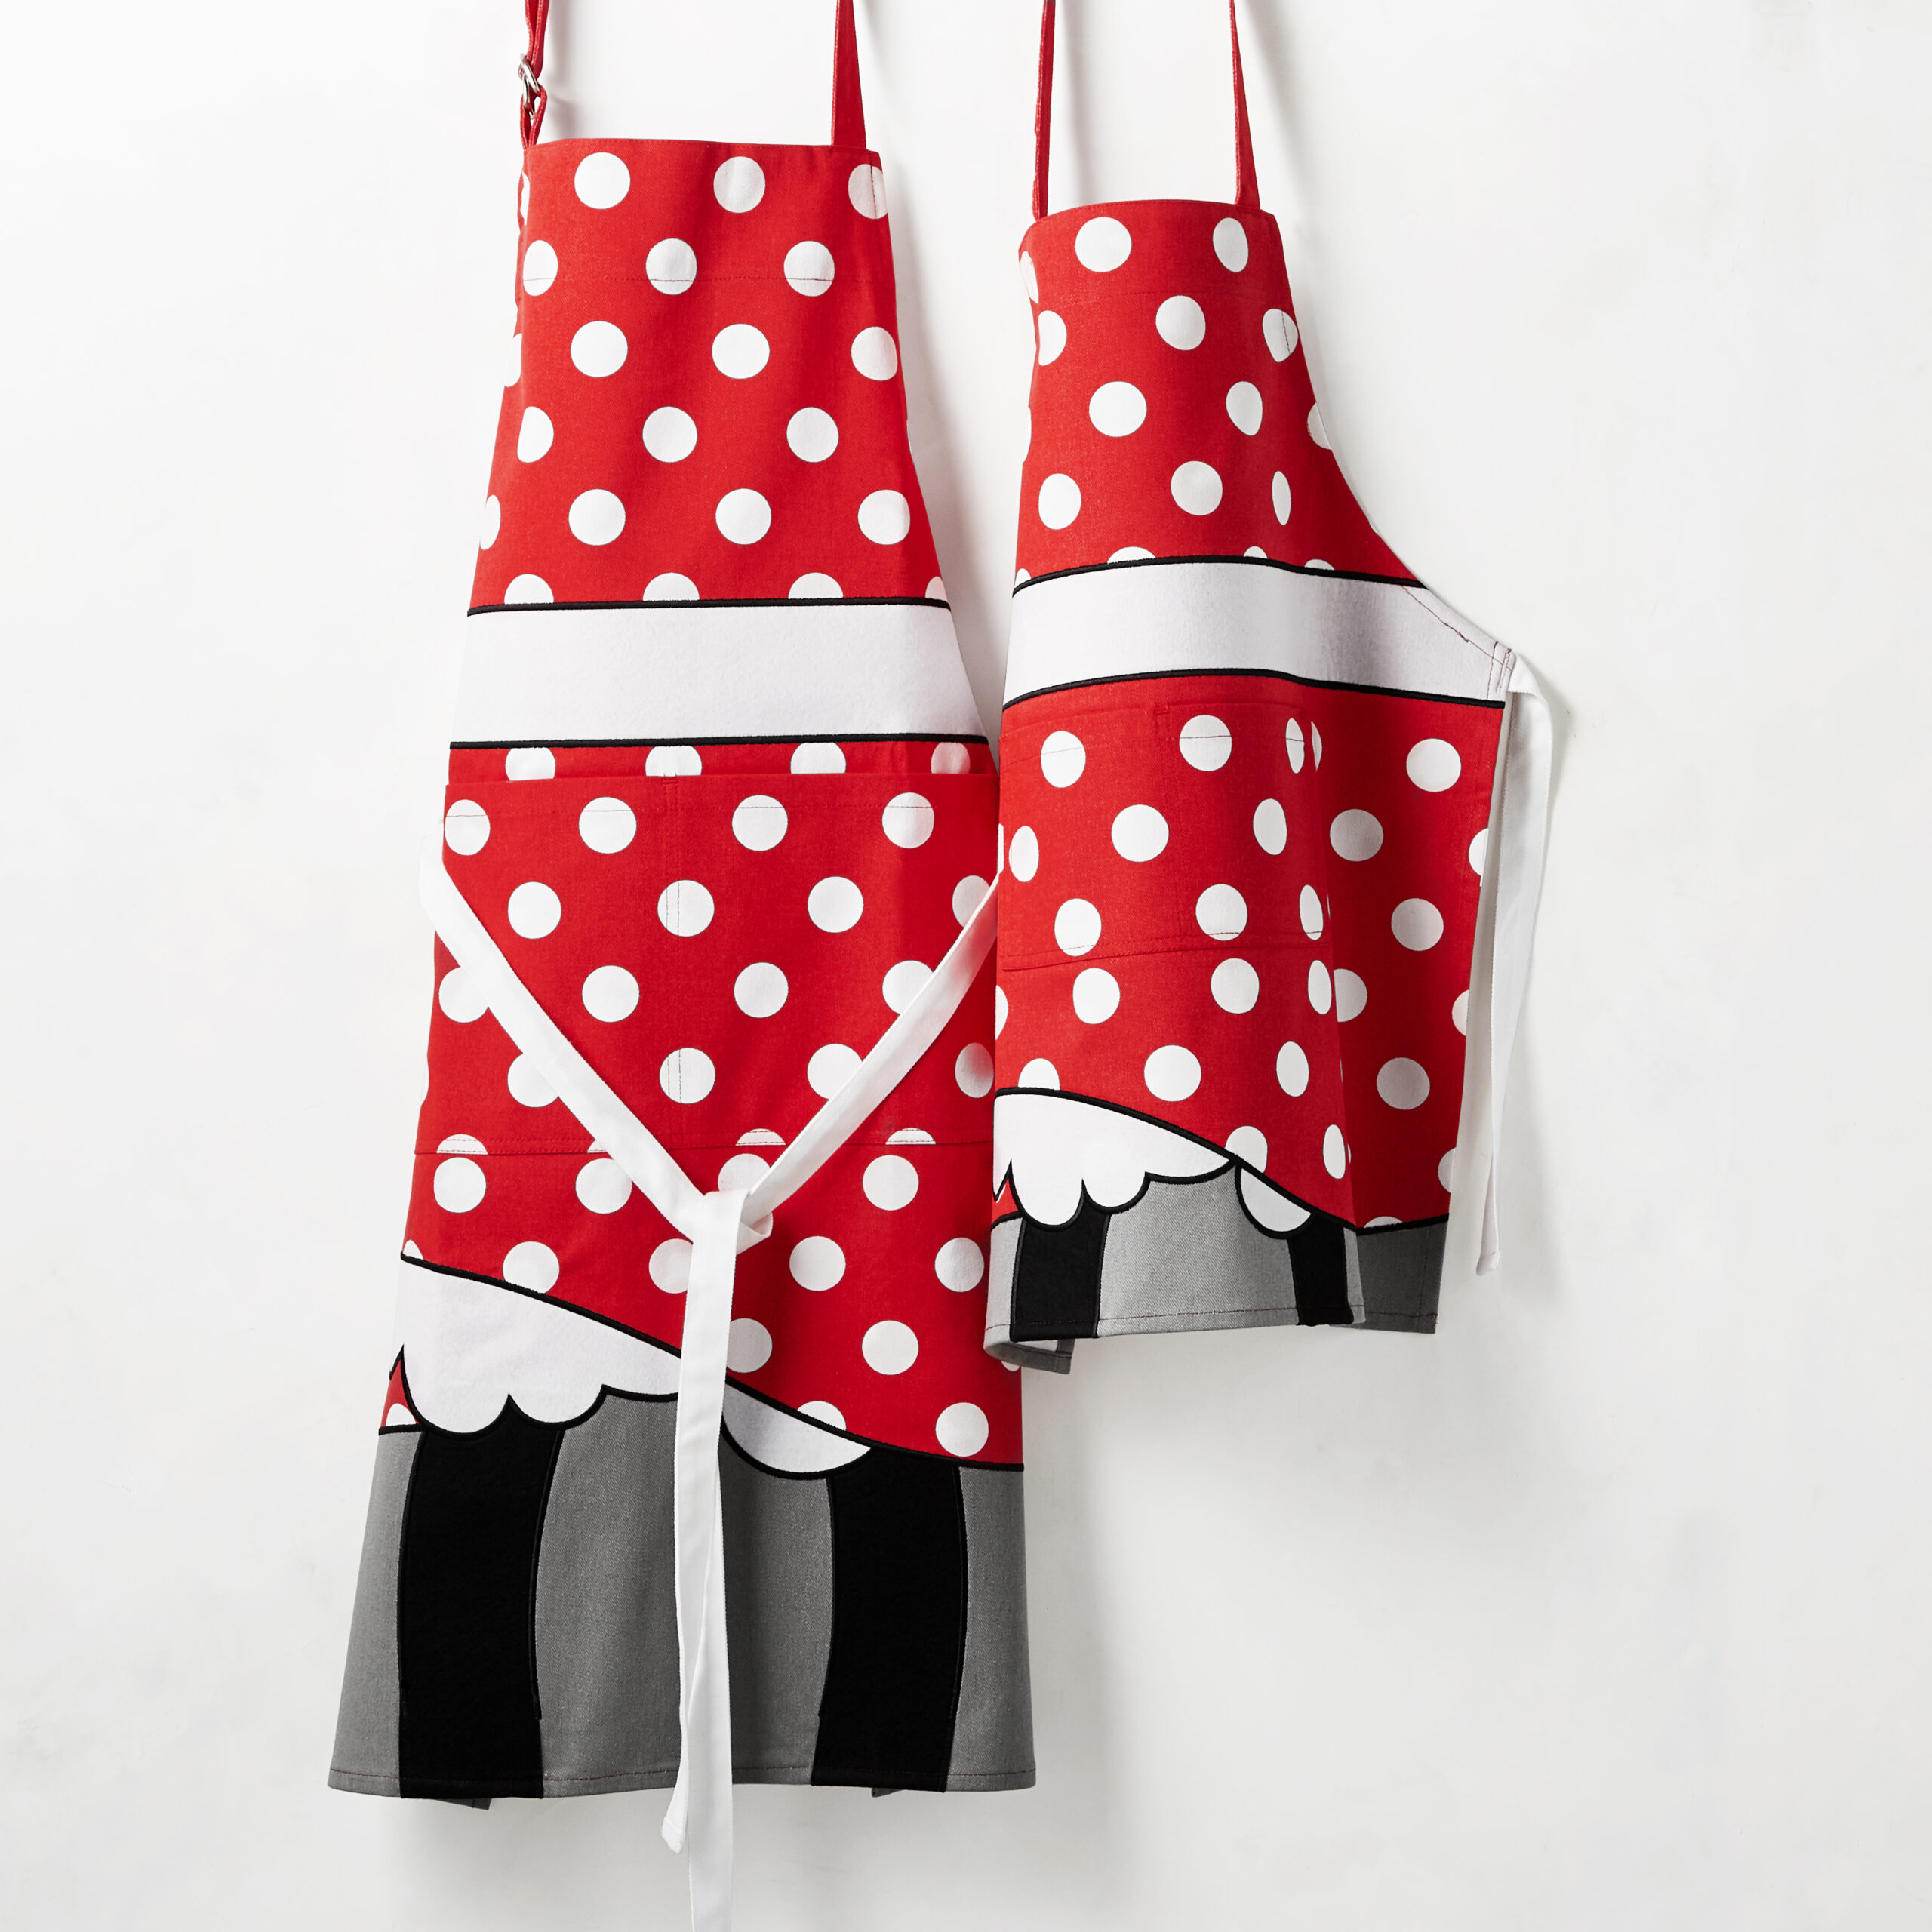 New Mickey Mouse Holiday Collection From William Sonoma